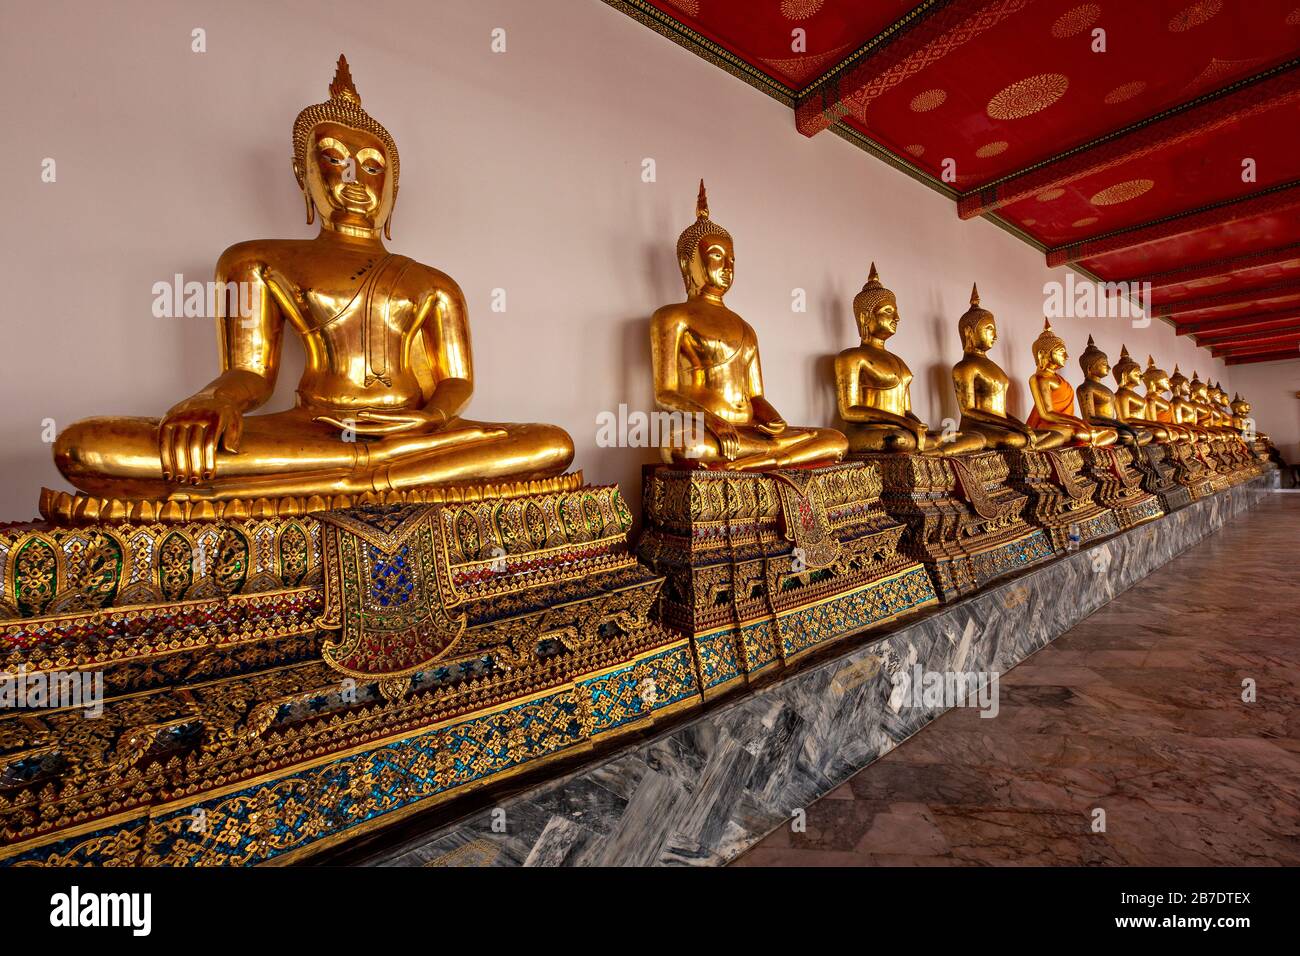 Row of Buddha statues in the Buddhist Temple known as Wat Pho, in Bangkok, Thailand Stock Photo